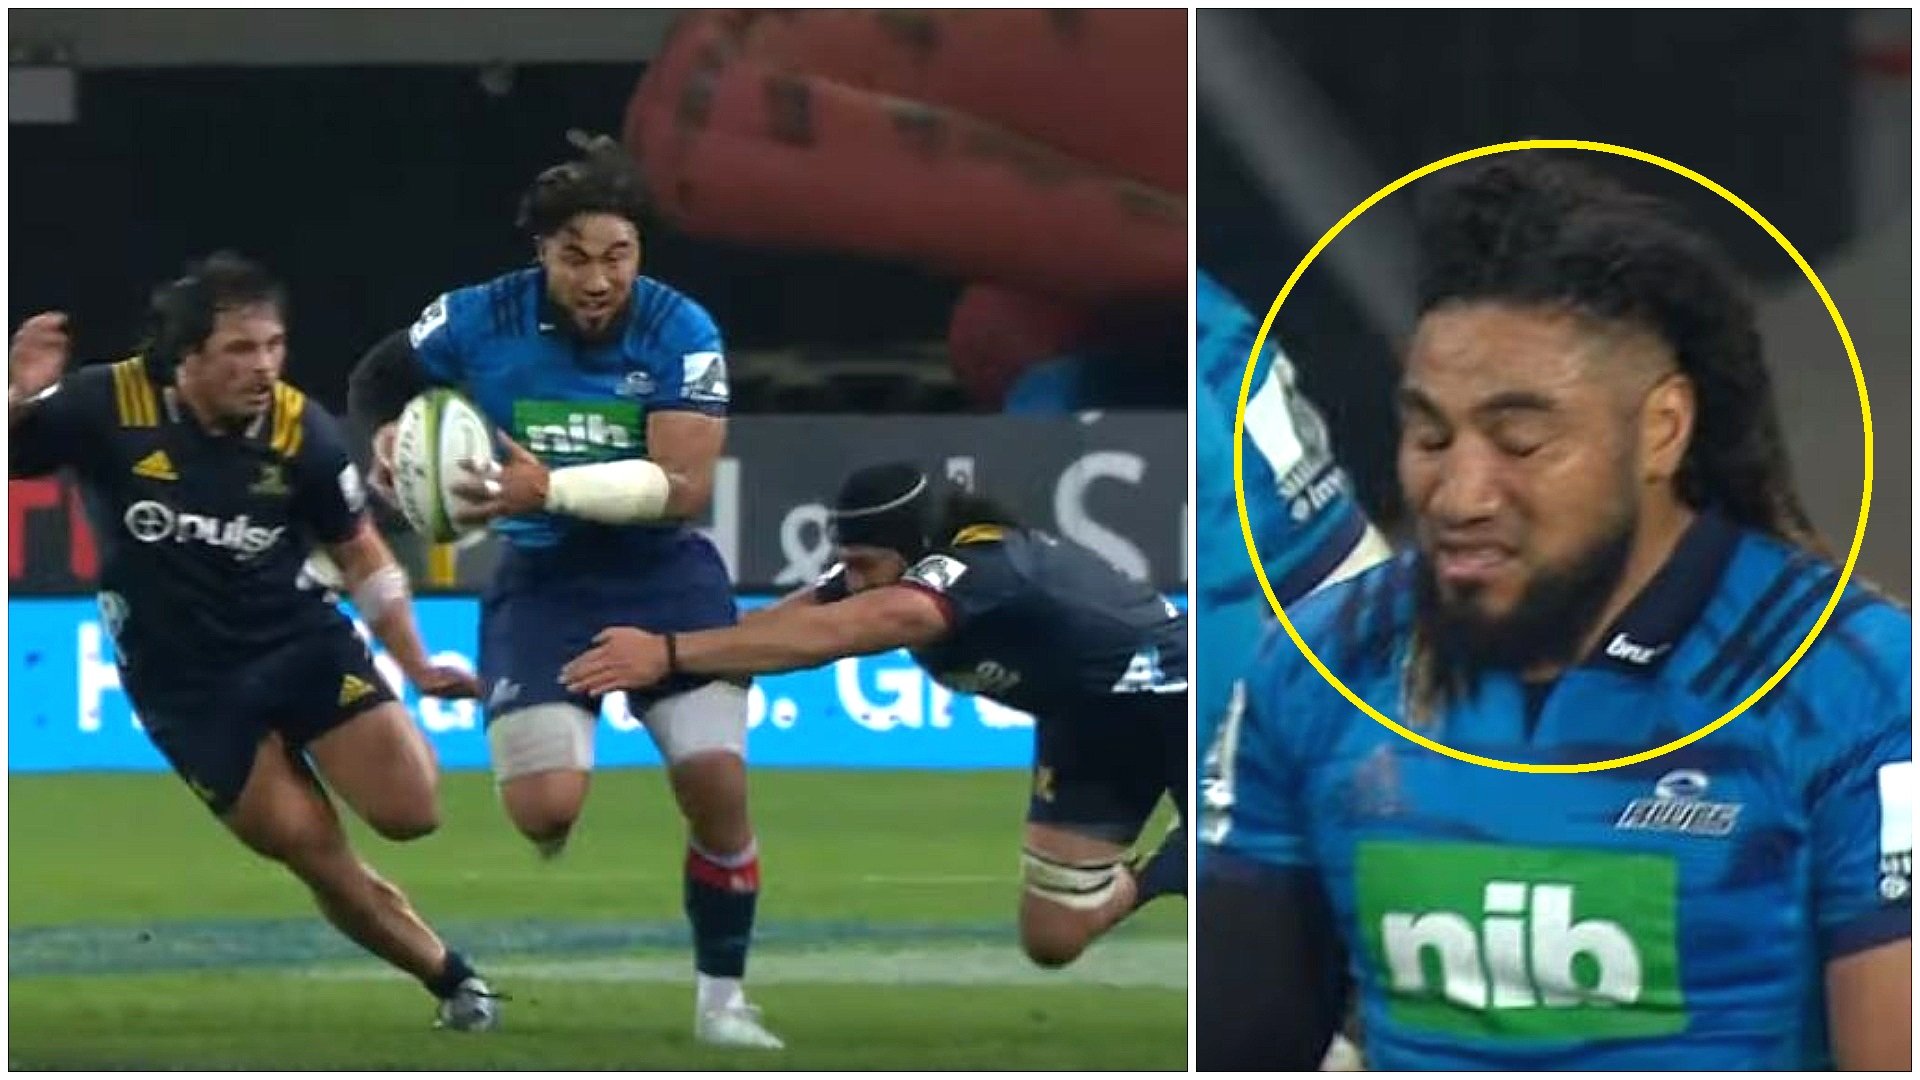 FOOTAGE: Europe's Ma'a Nonu feasts on more New Zealand wannabes